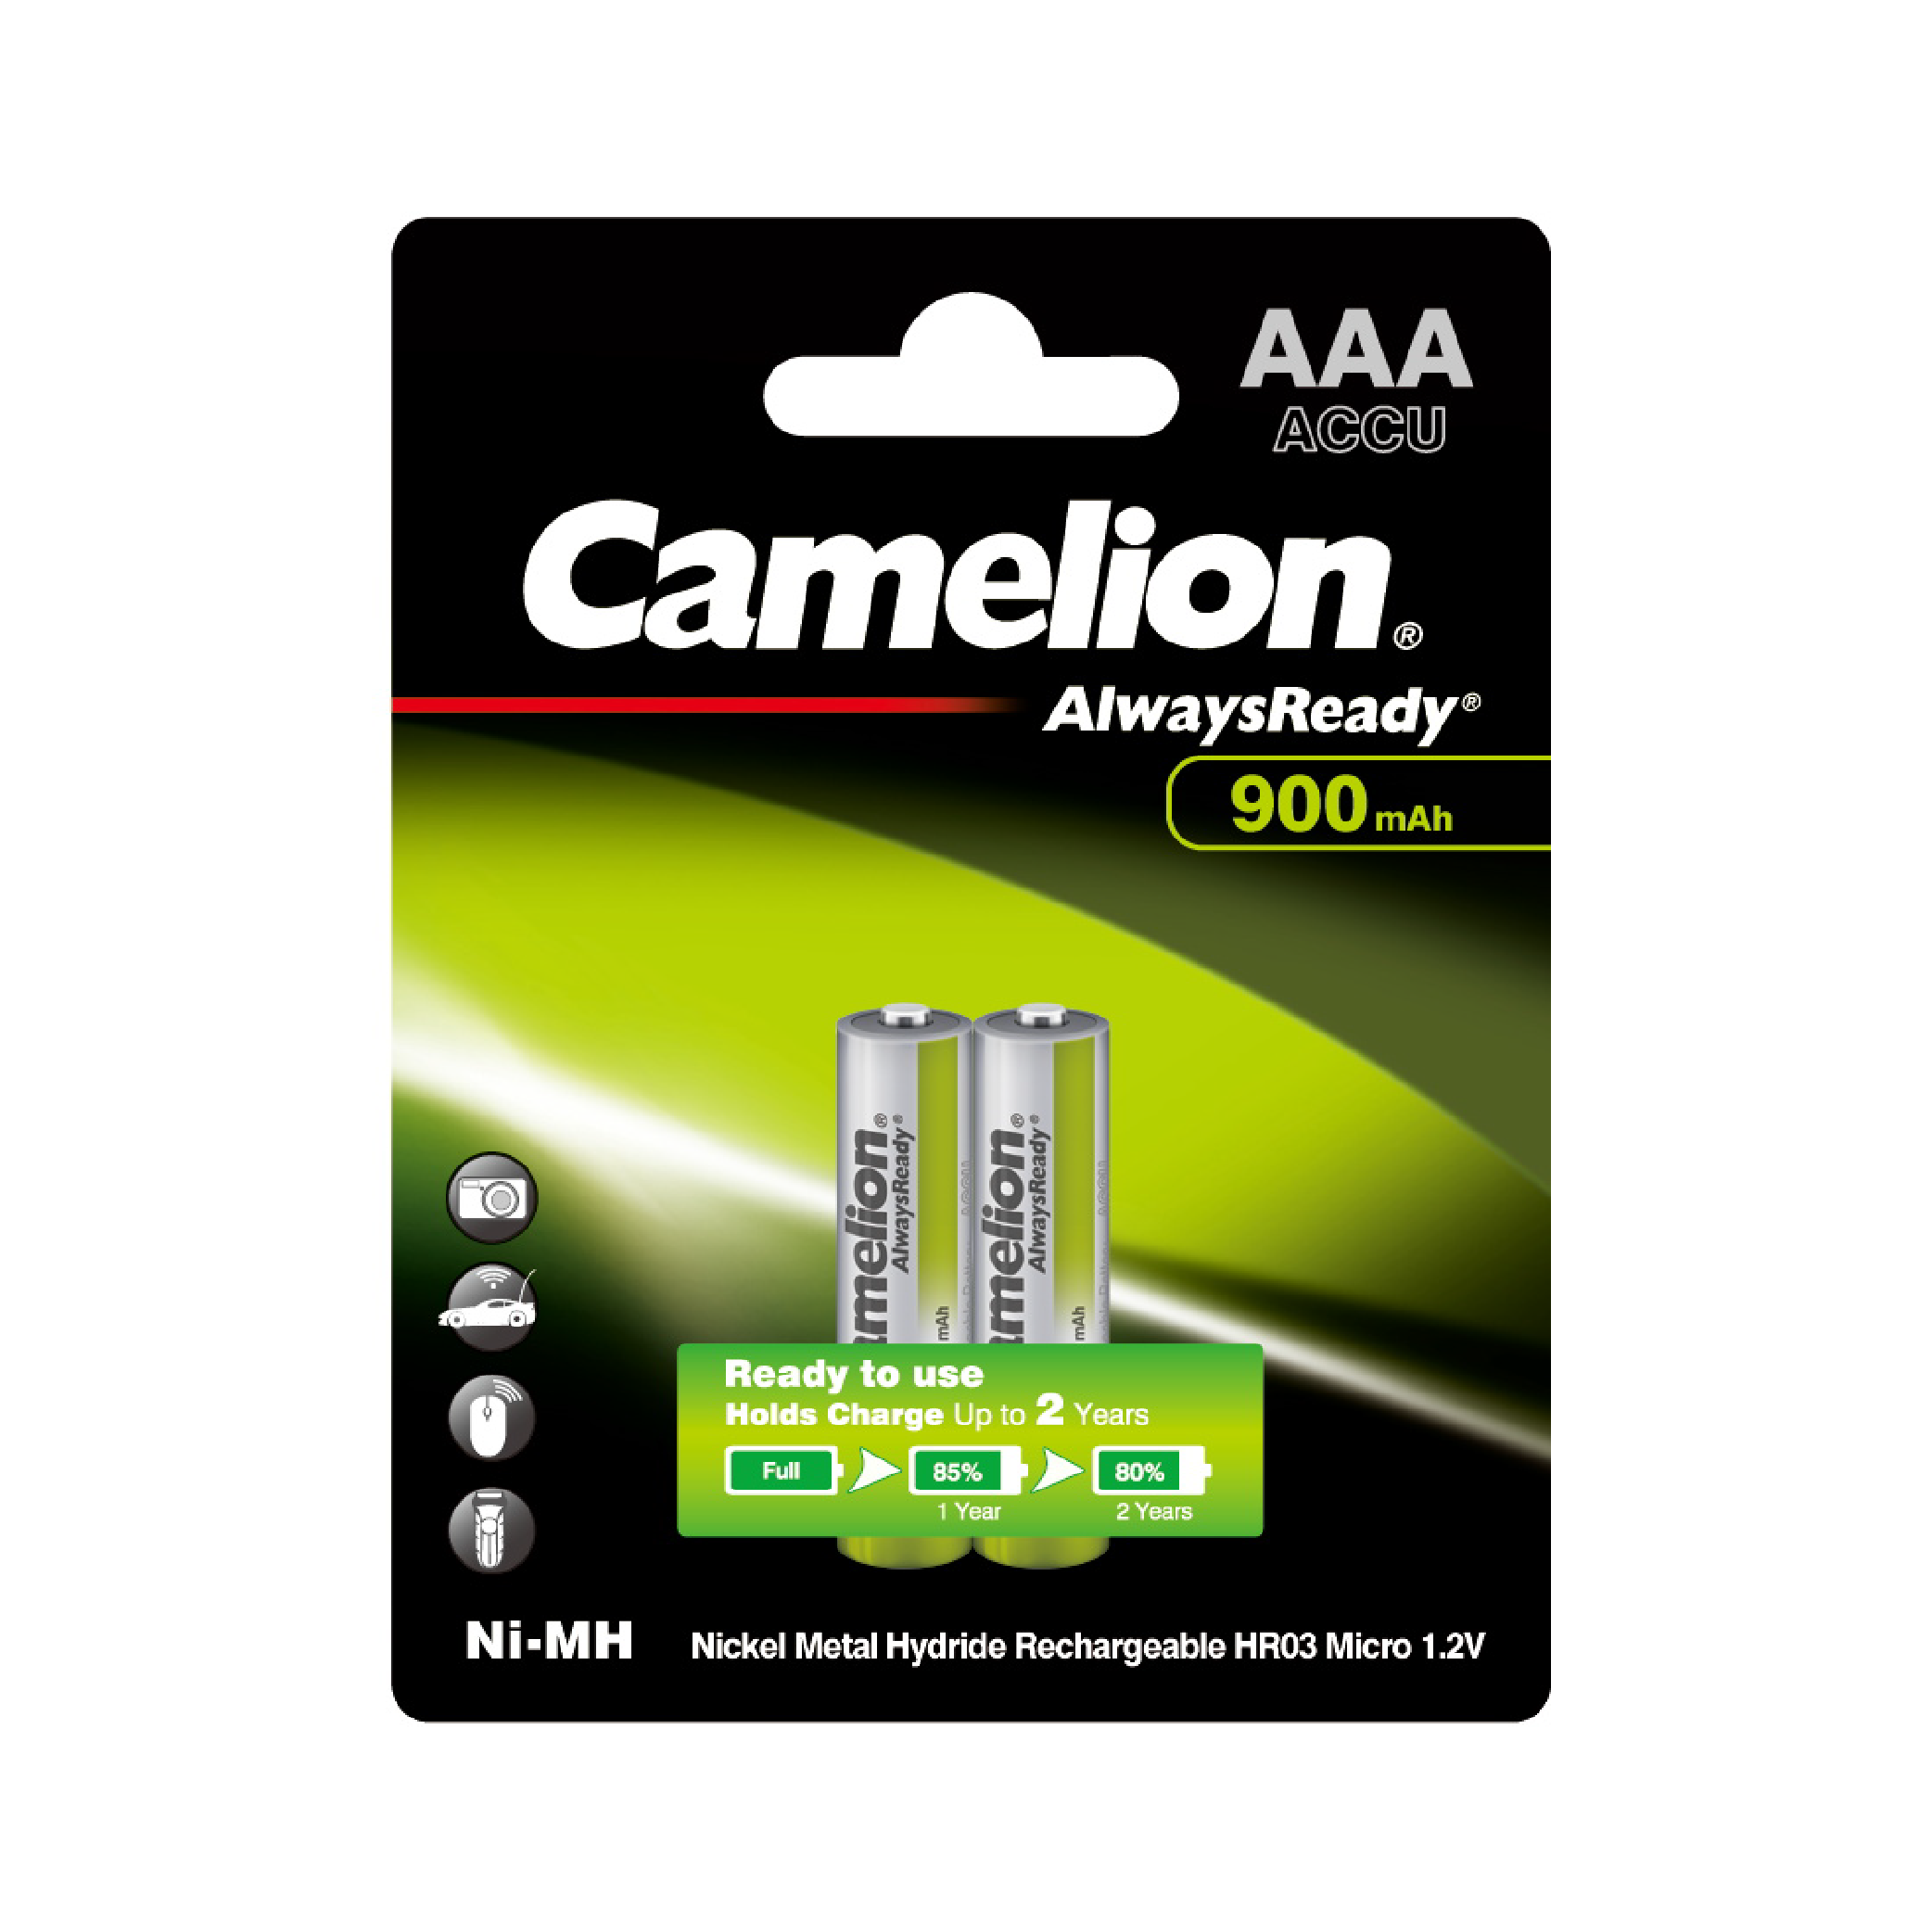 Camelion AAA Always Ready 900mAh Rechargeable Battery 2pk Blister